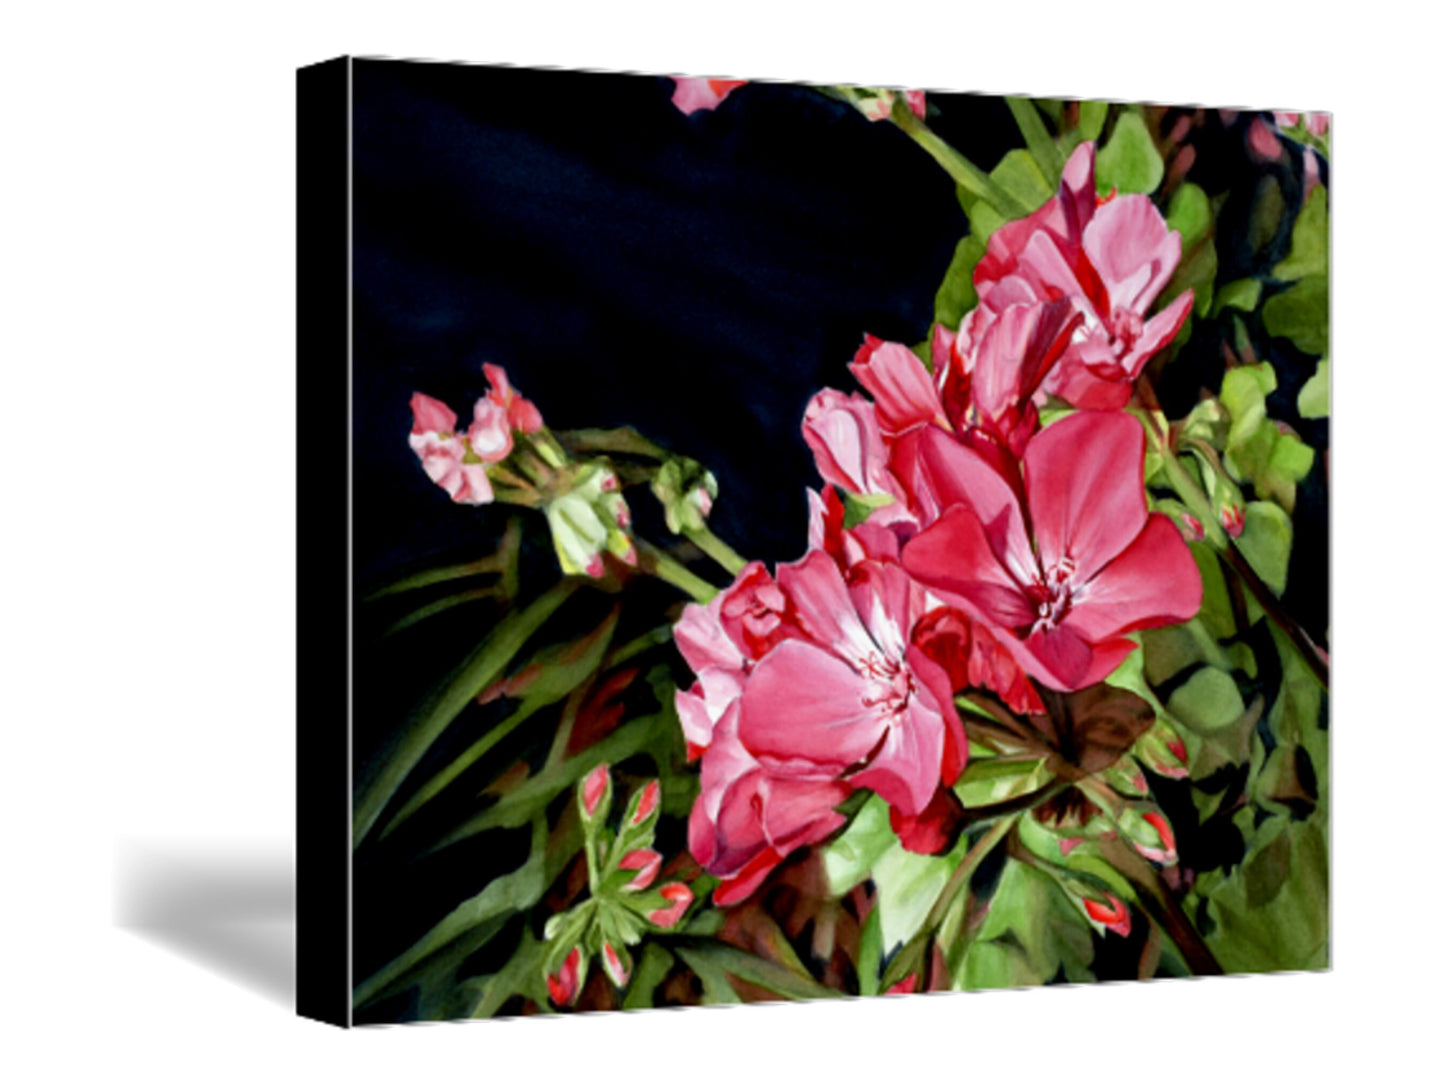 Large Wall Art, Watercolor Flowers, Pink Floral Painting, Above Bed Decor, Canvas Print